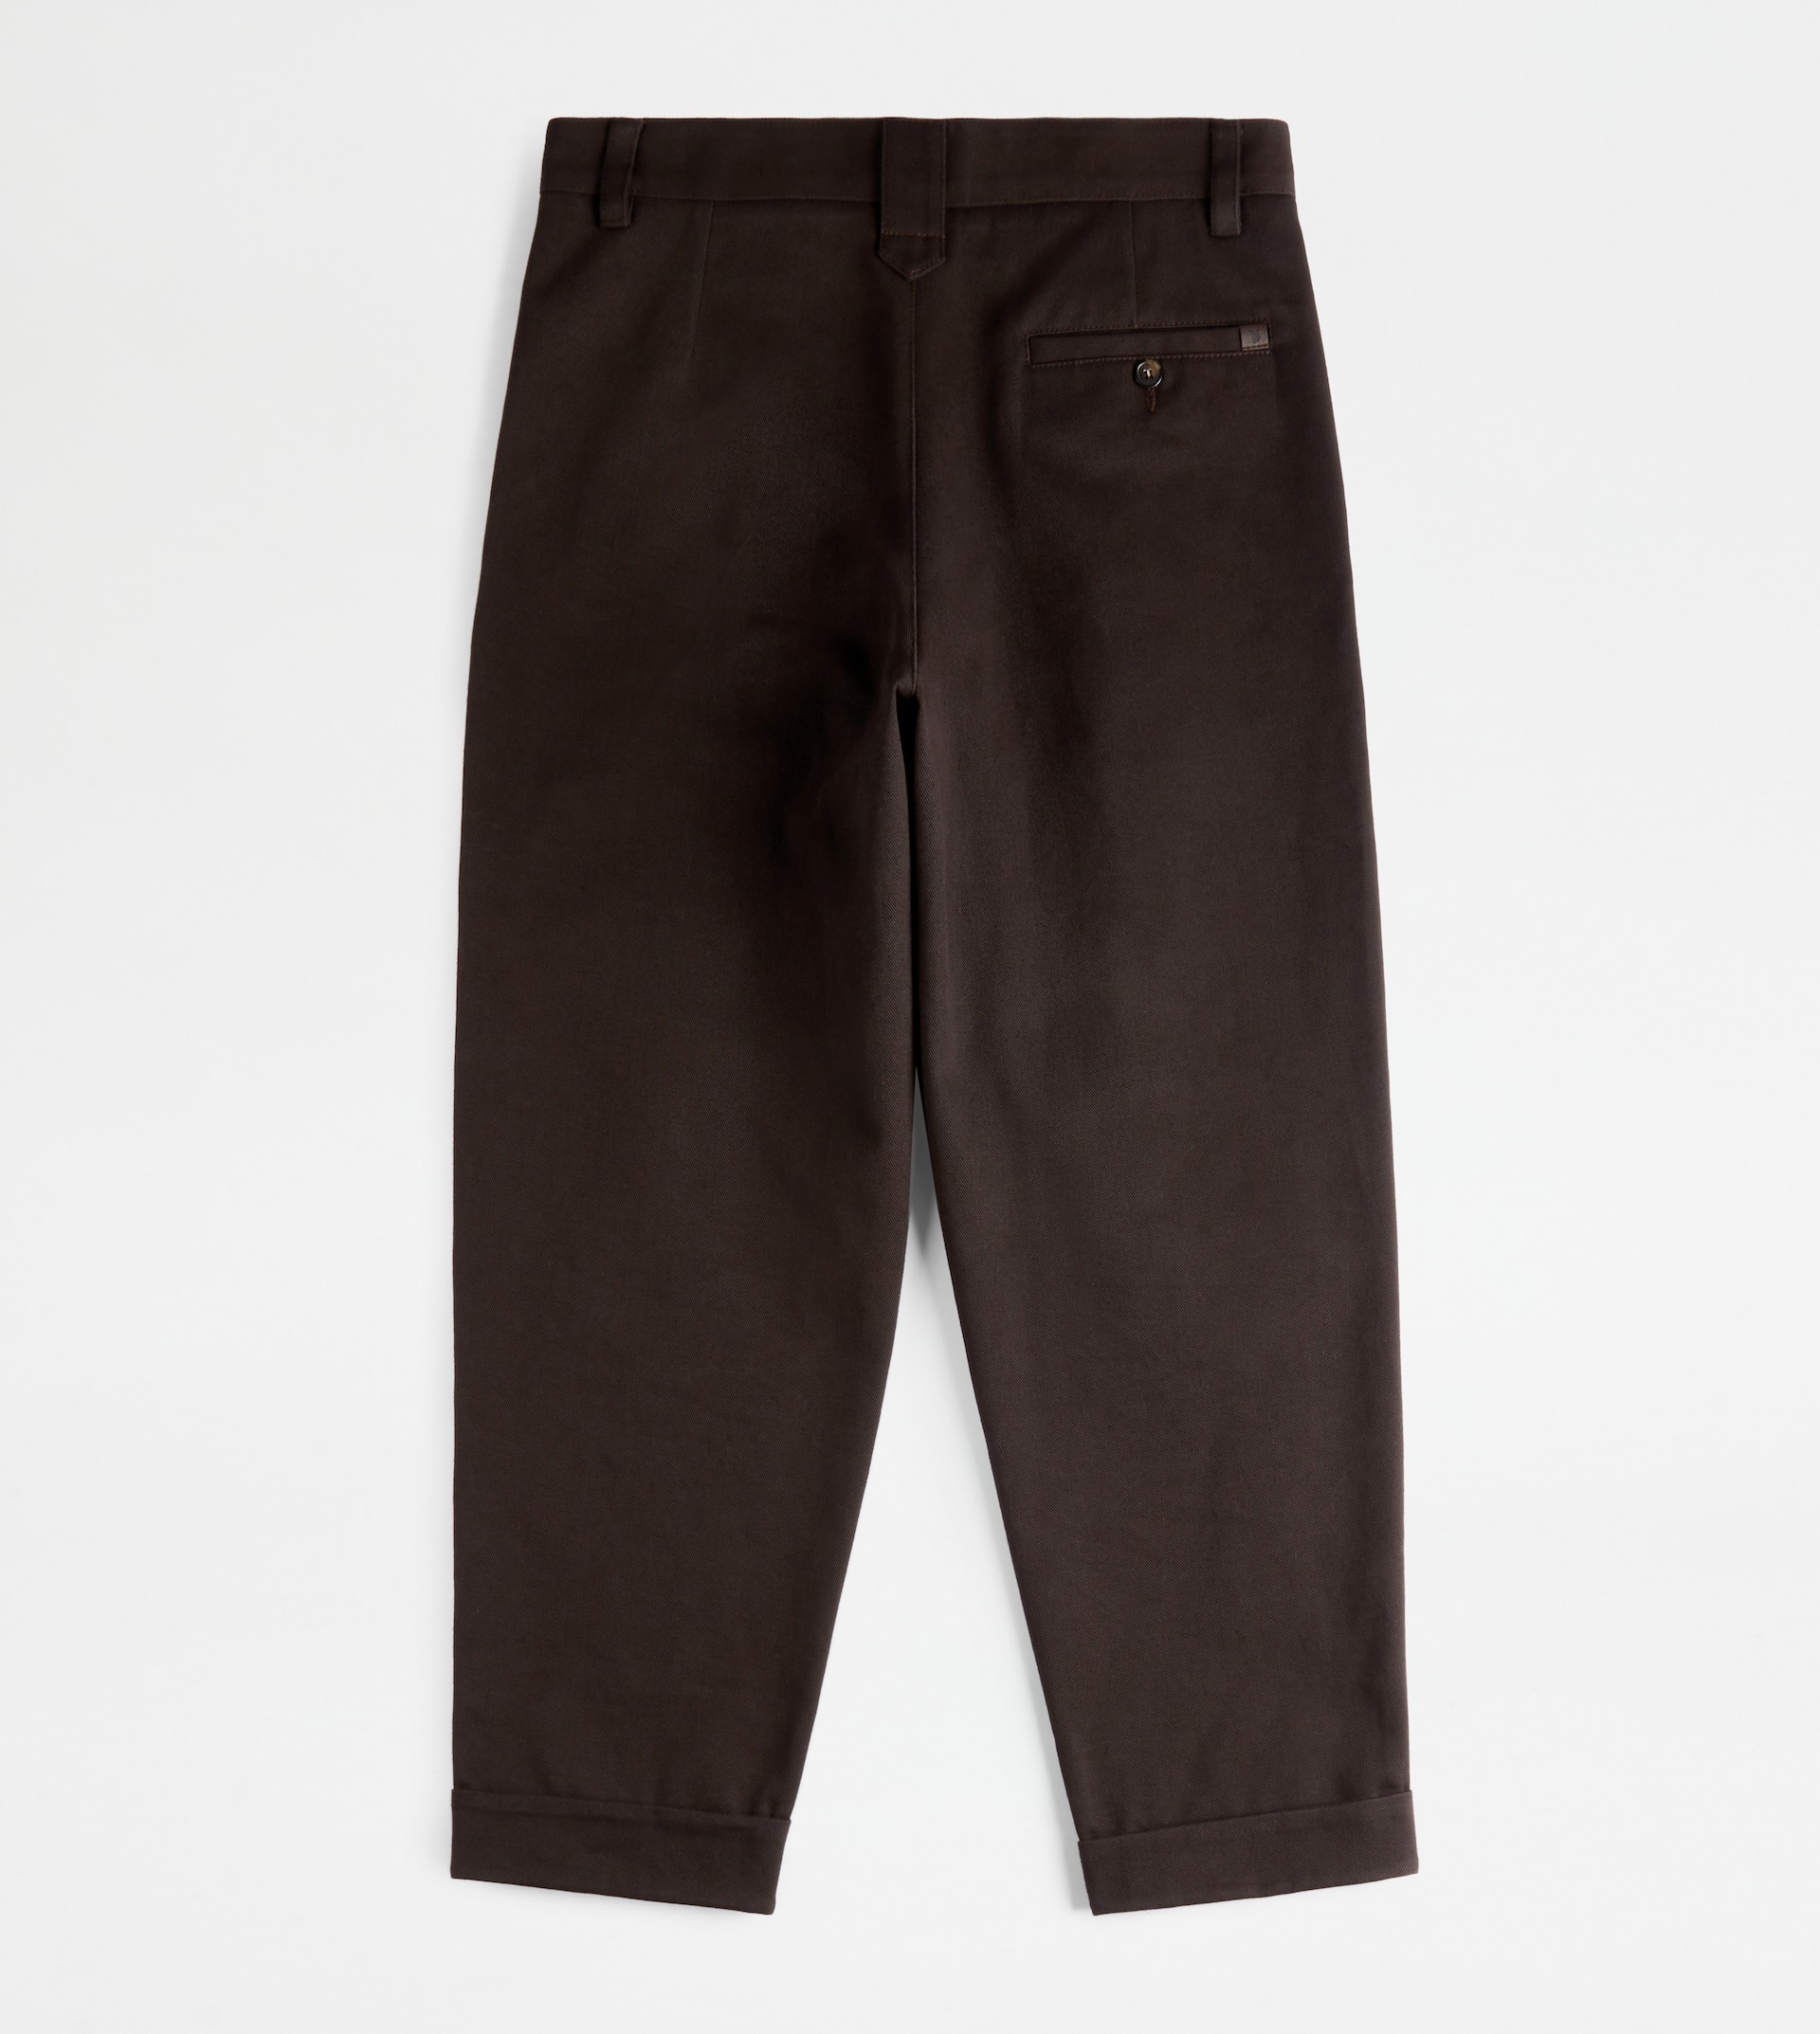 PANTS WITH DARTS - BROWN - 7